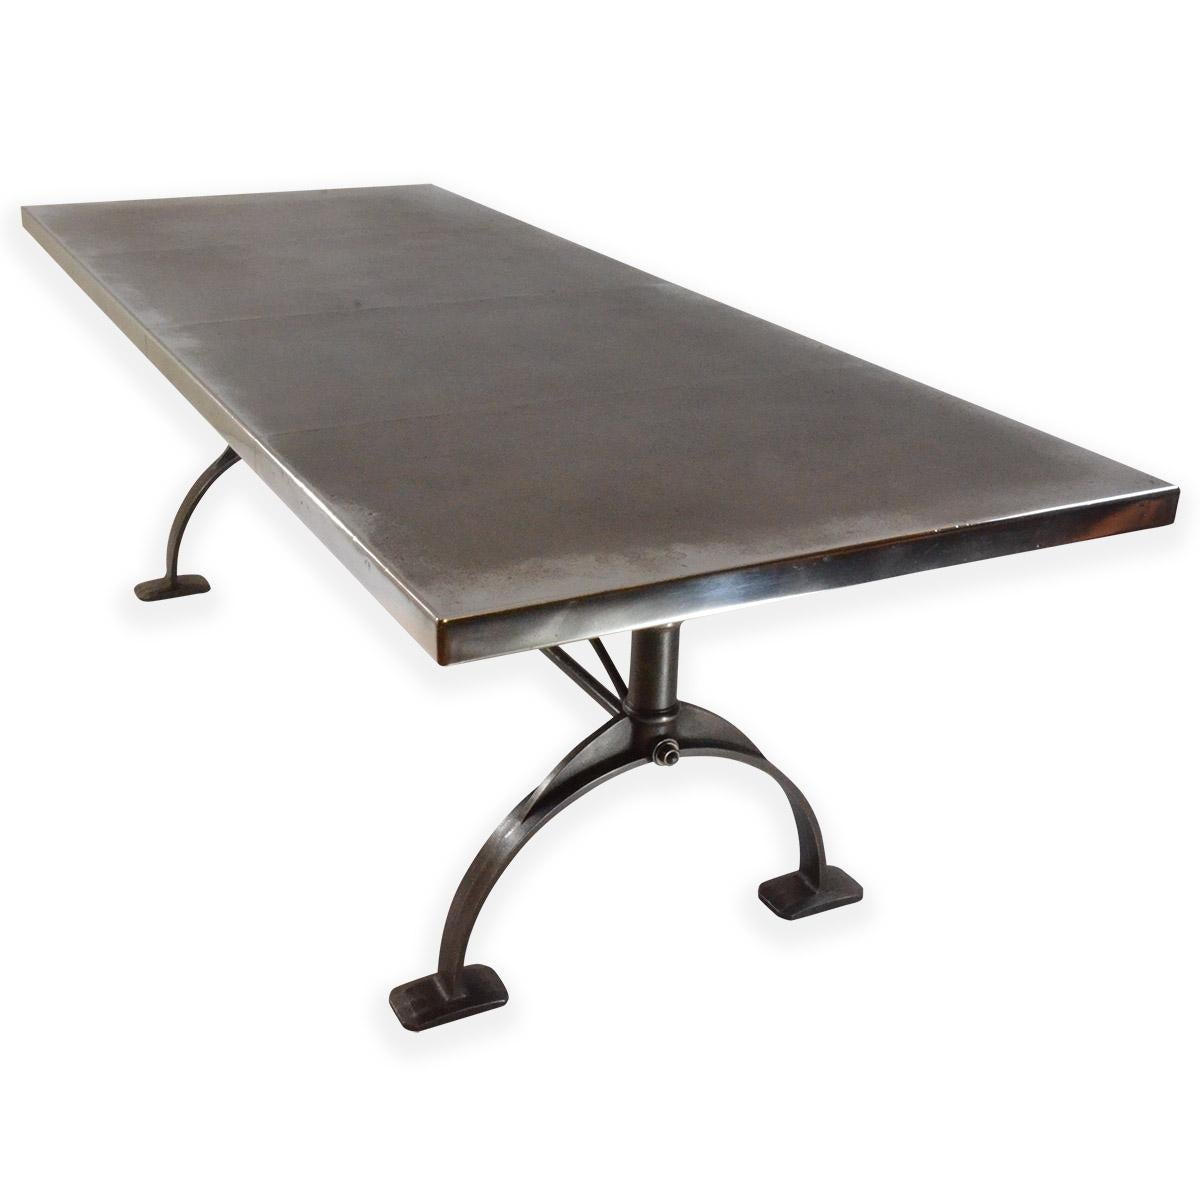 An Andrew Nebbett Designs standard sized zinc top dining table with square profile edges, on unique cast iron legs. This dining table (or kitchen table) is tailor-made to order and is handmade, coloured, patinated and finished in our English